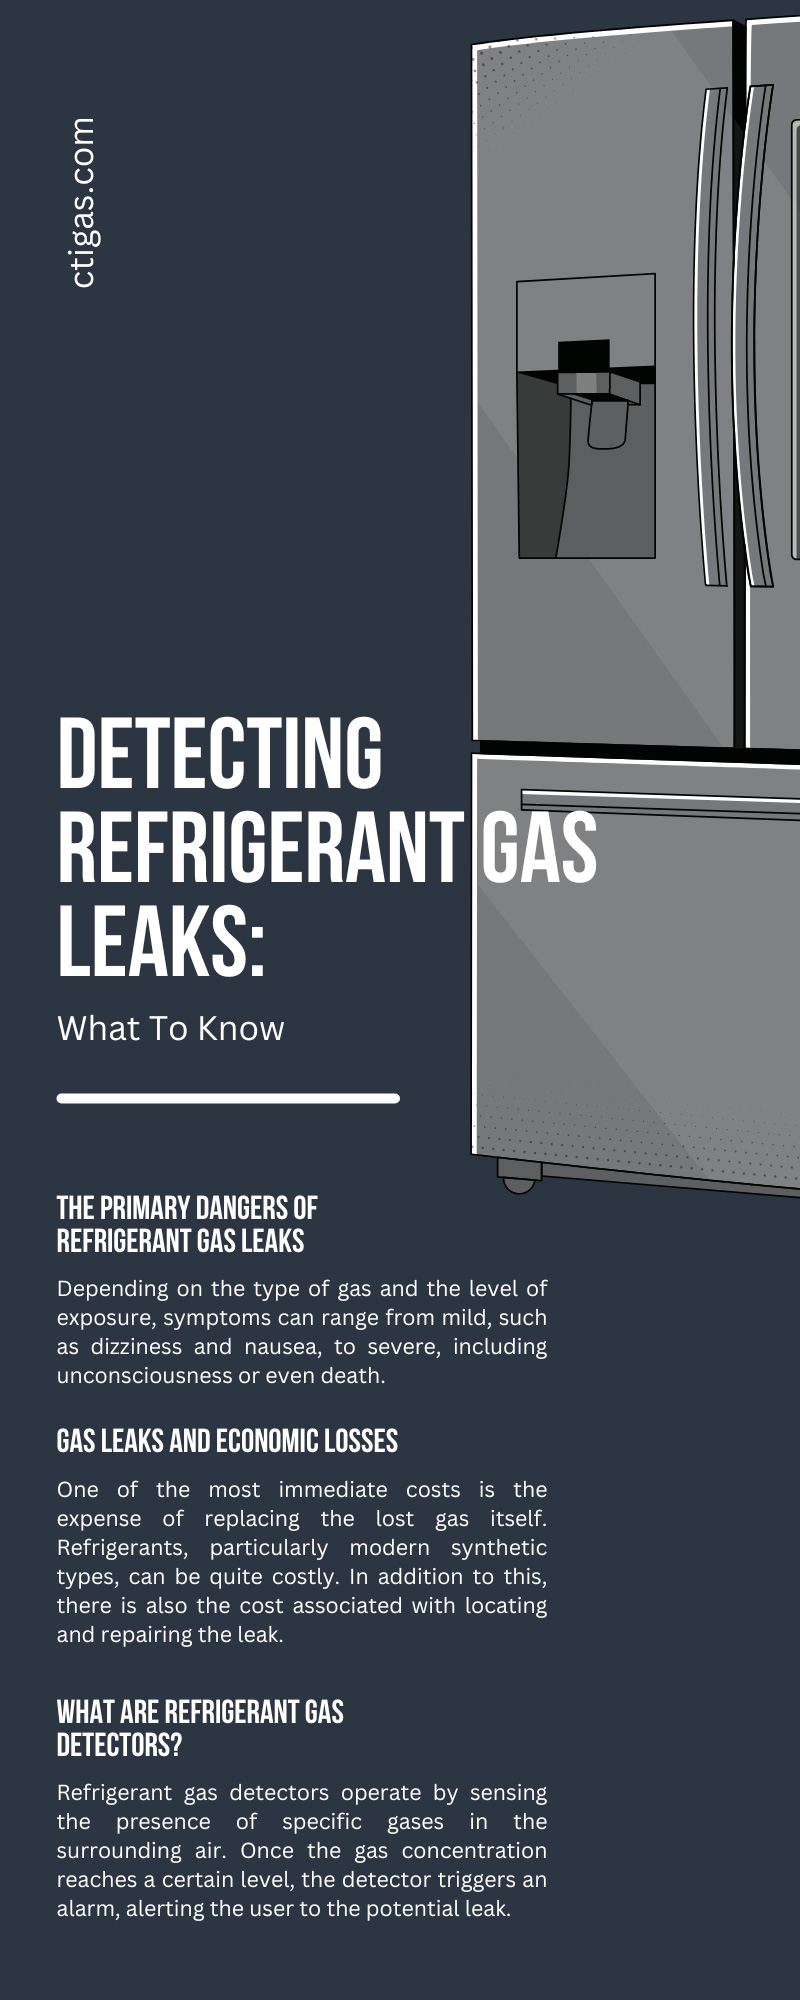 Detecting Refrigerant Gas Leaks: What To Know
